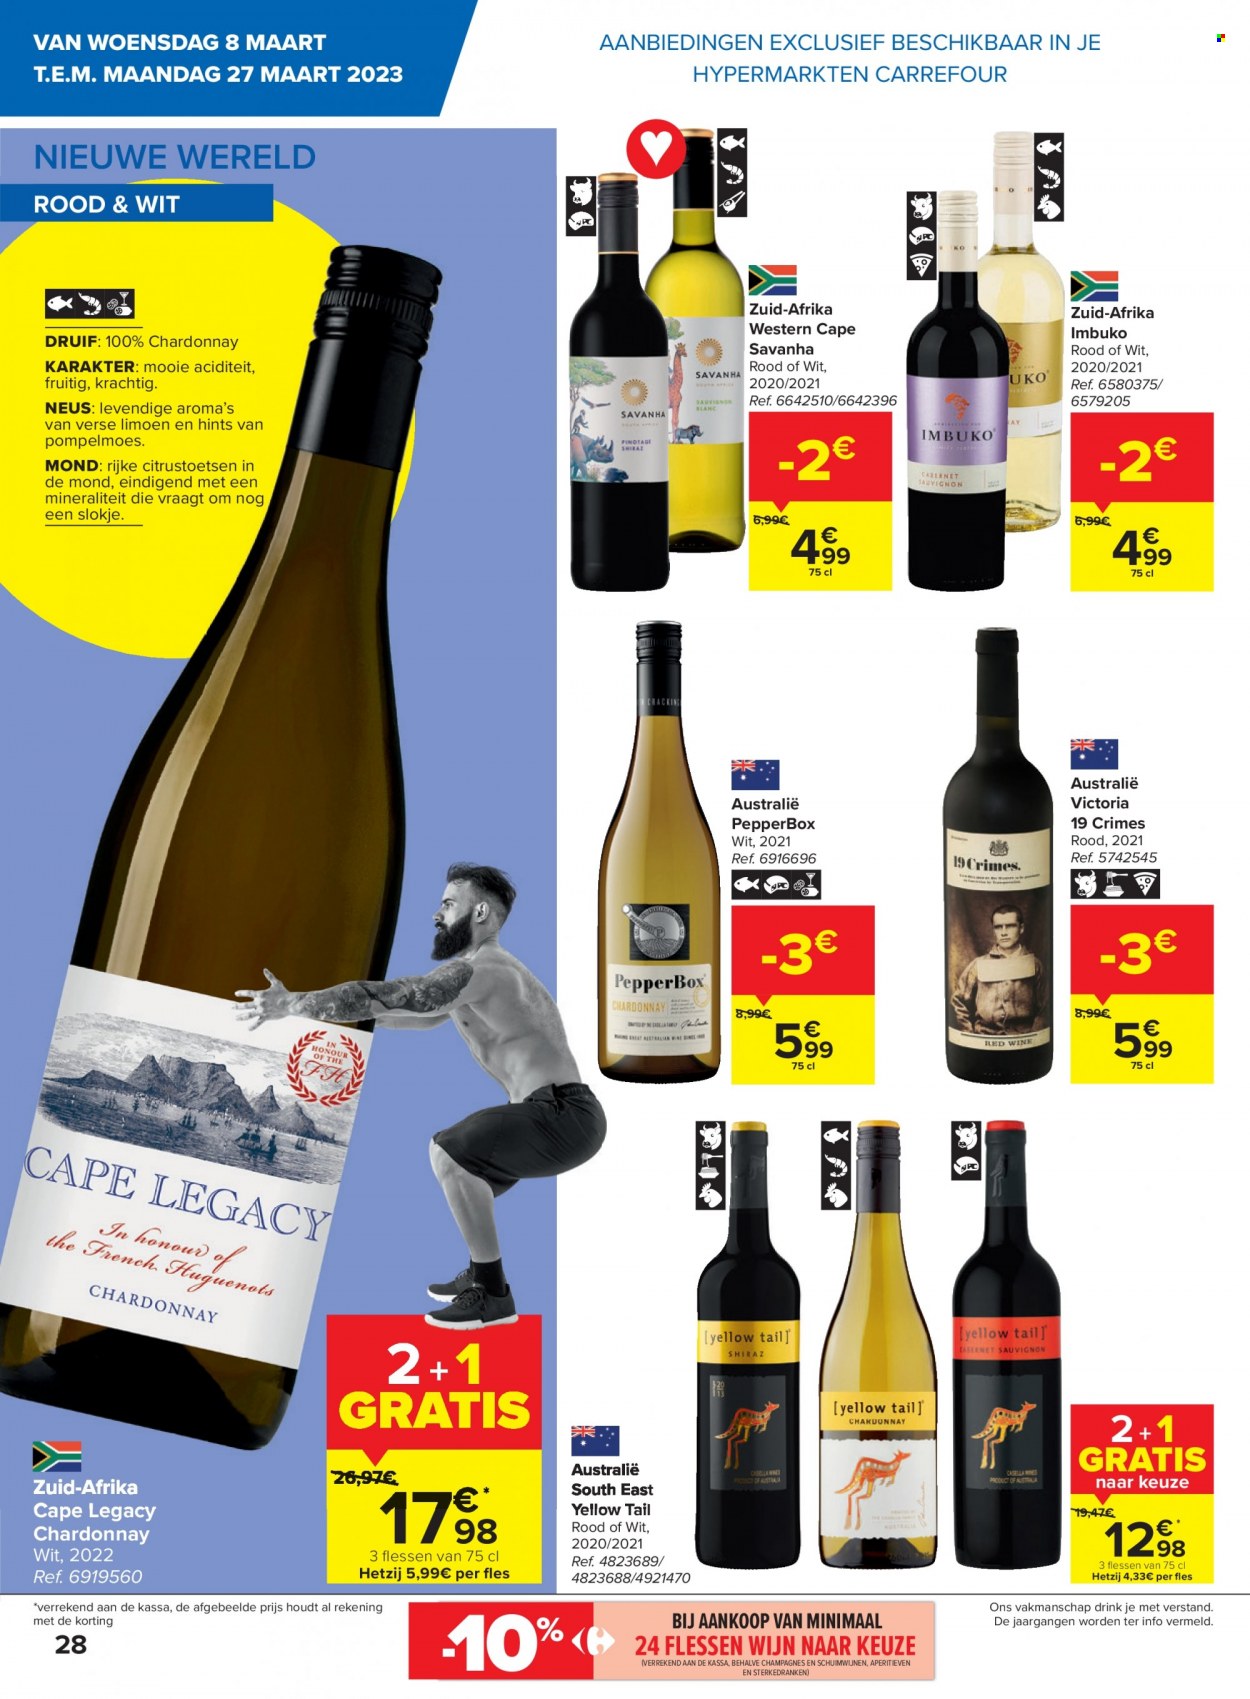 Catalogue Carrefour hypermarkt - 8.3.2023 - 27.3.2023. Page 12.